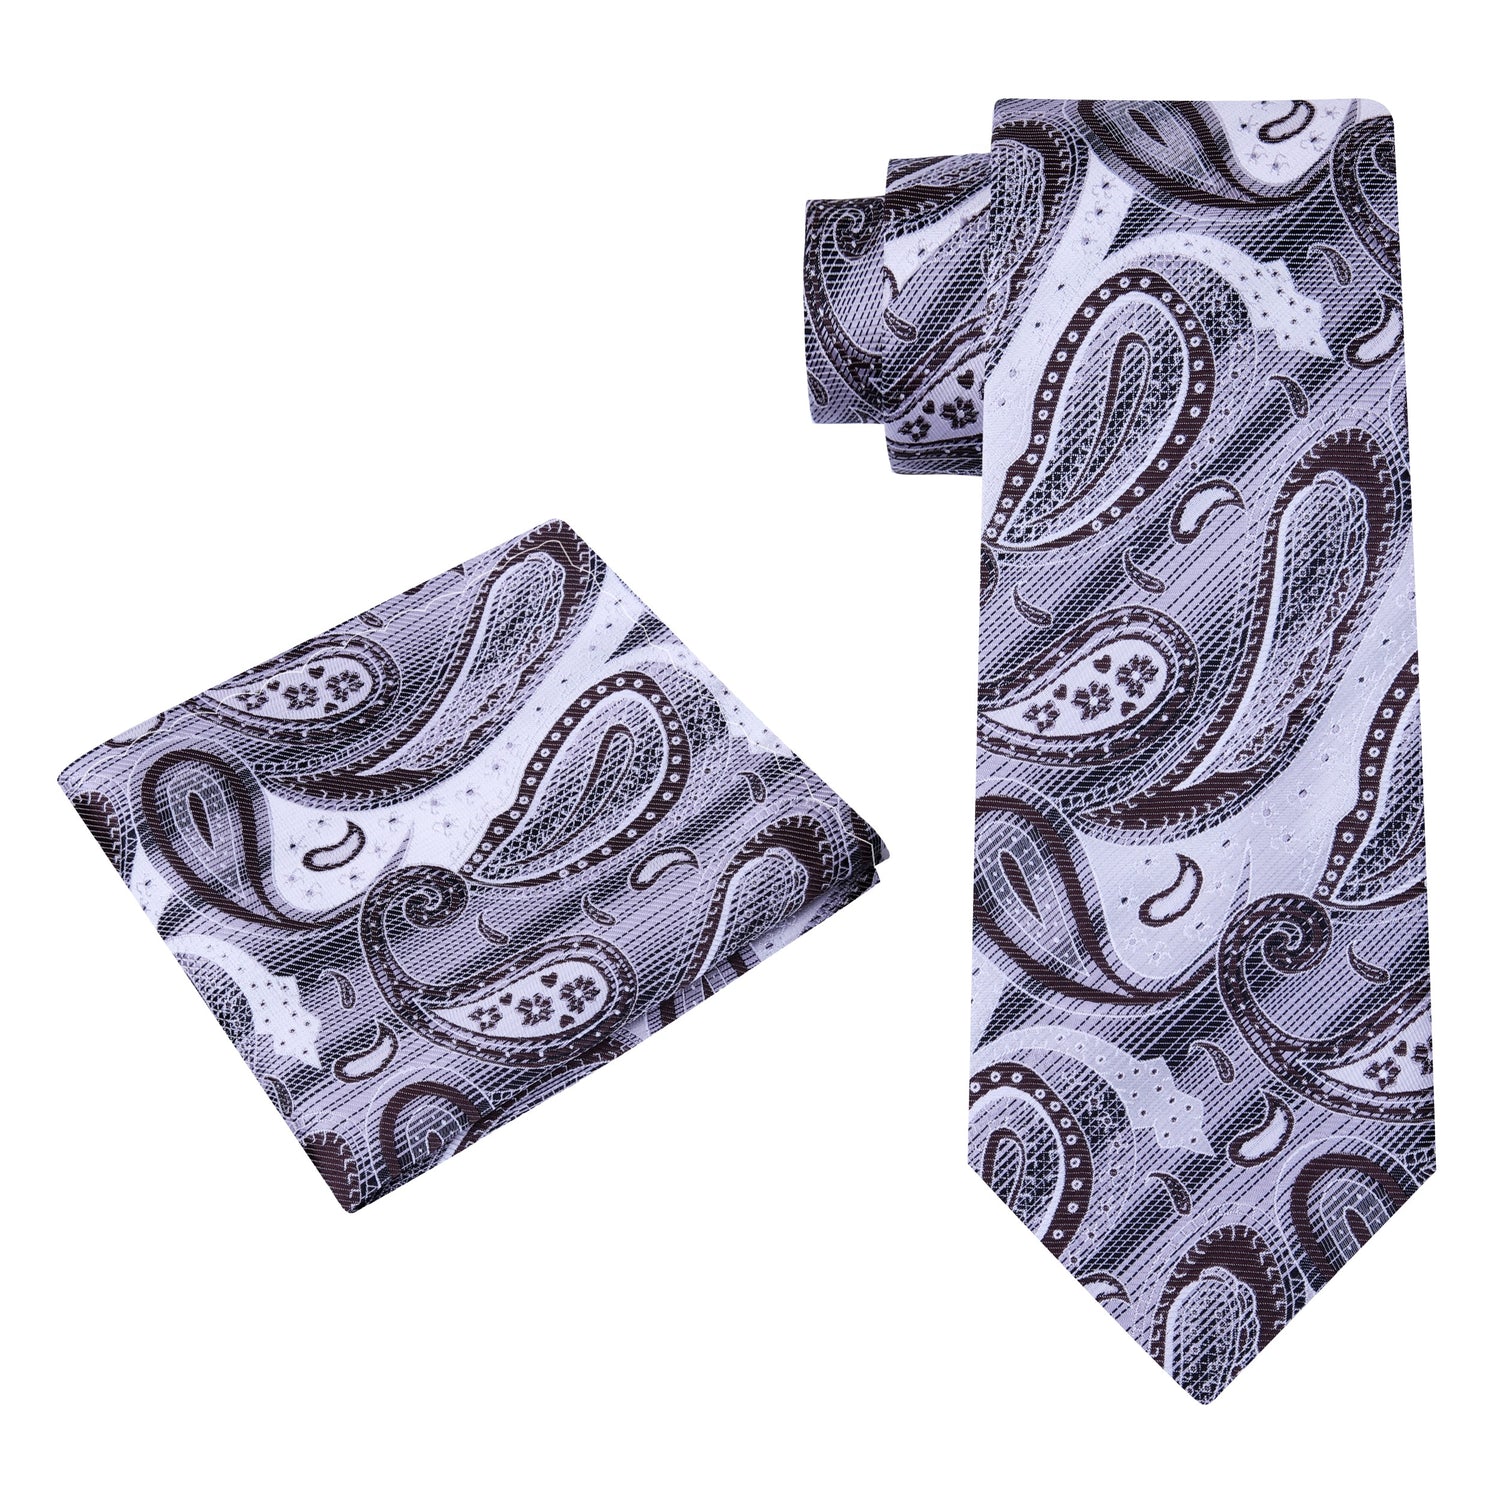 Alt View: A White, Grey, Brown Paisley Pattern Silk Necktie, With Pocket Square